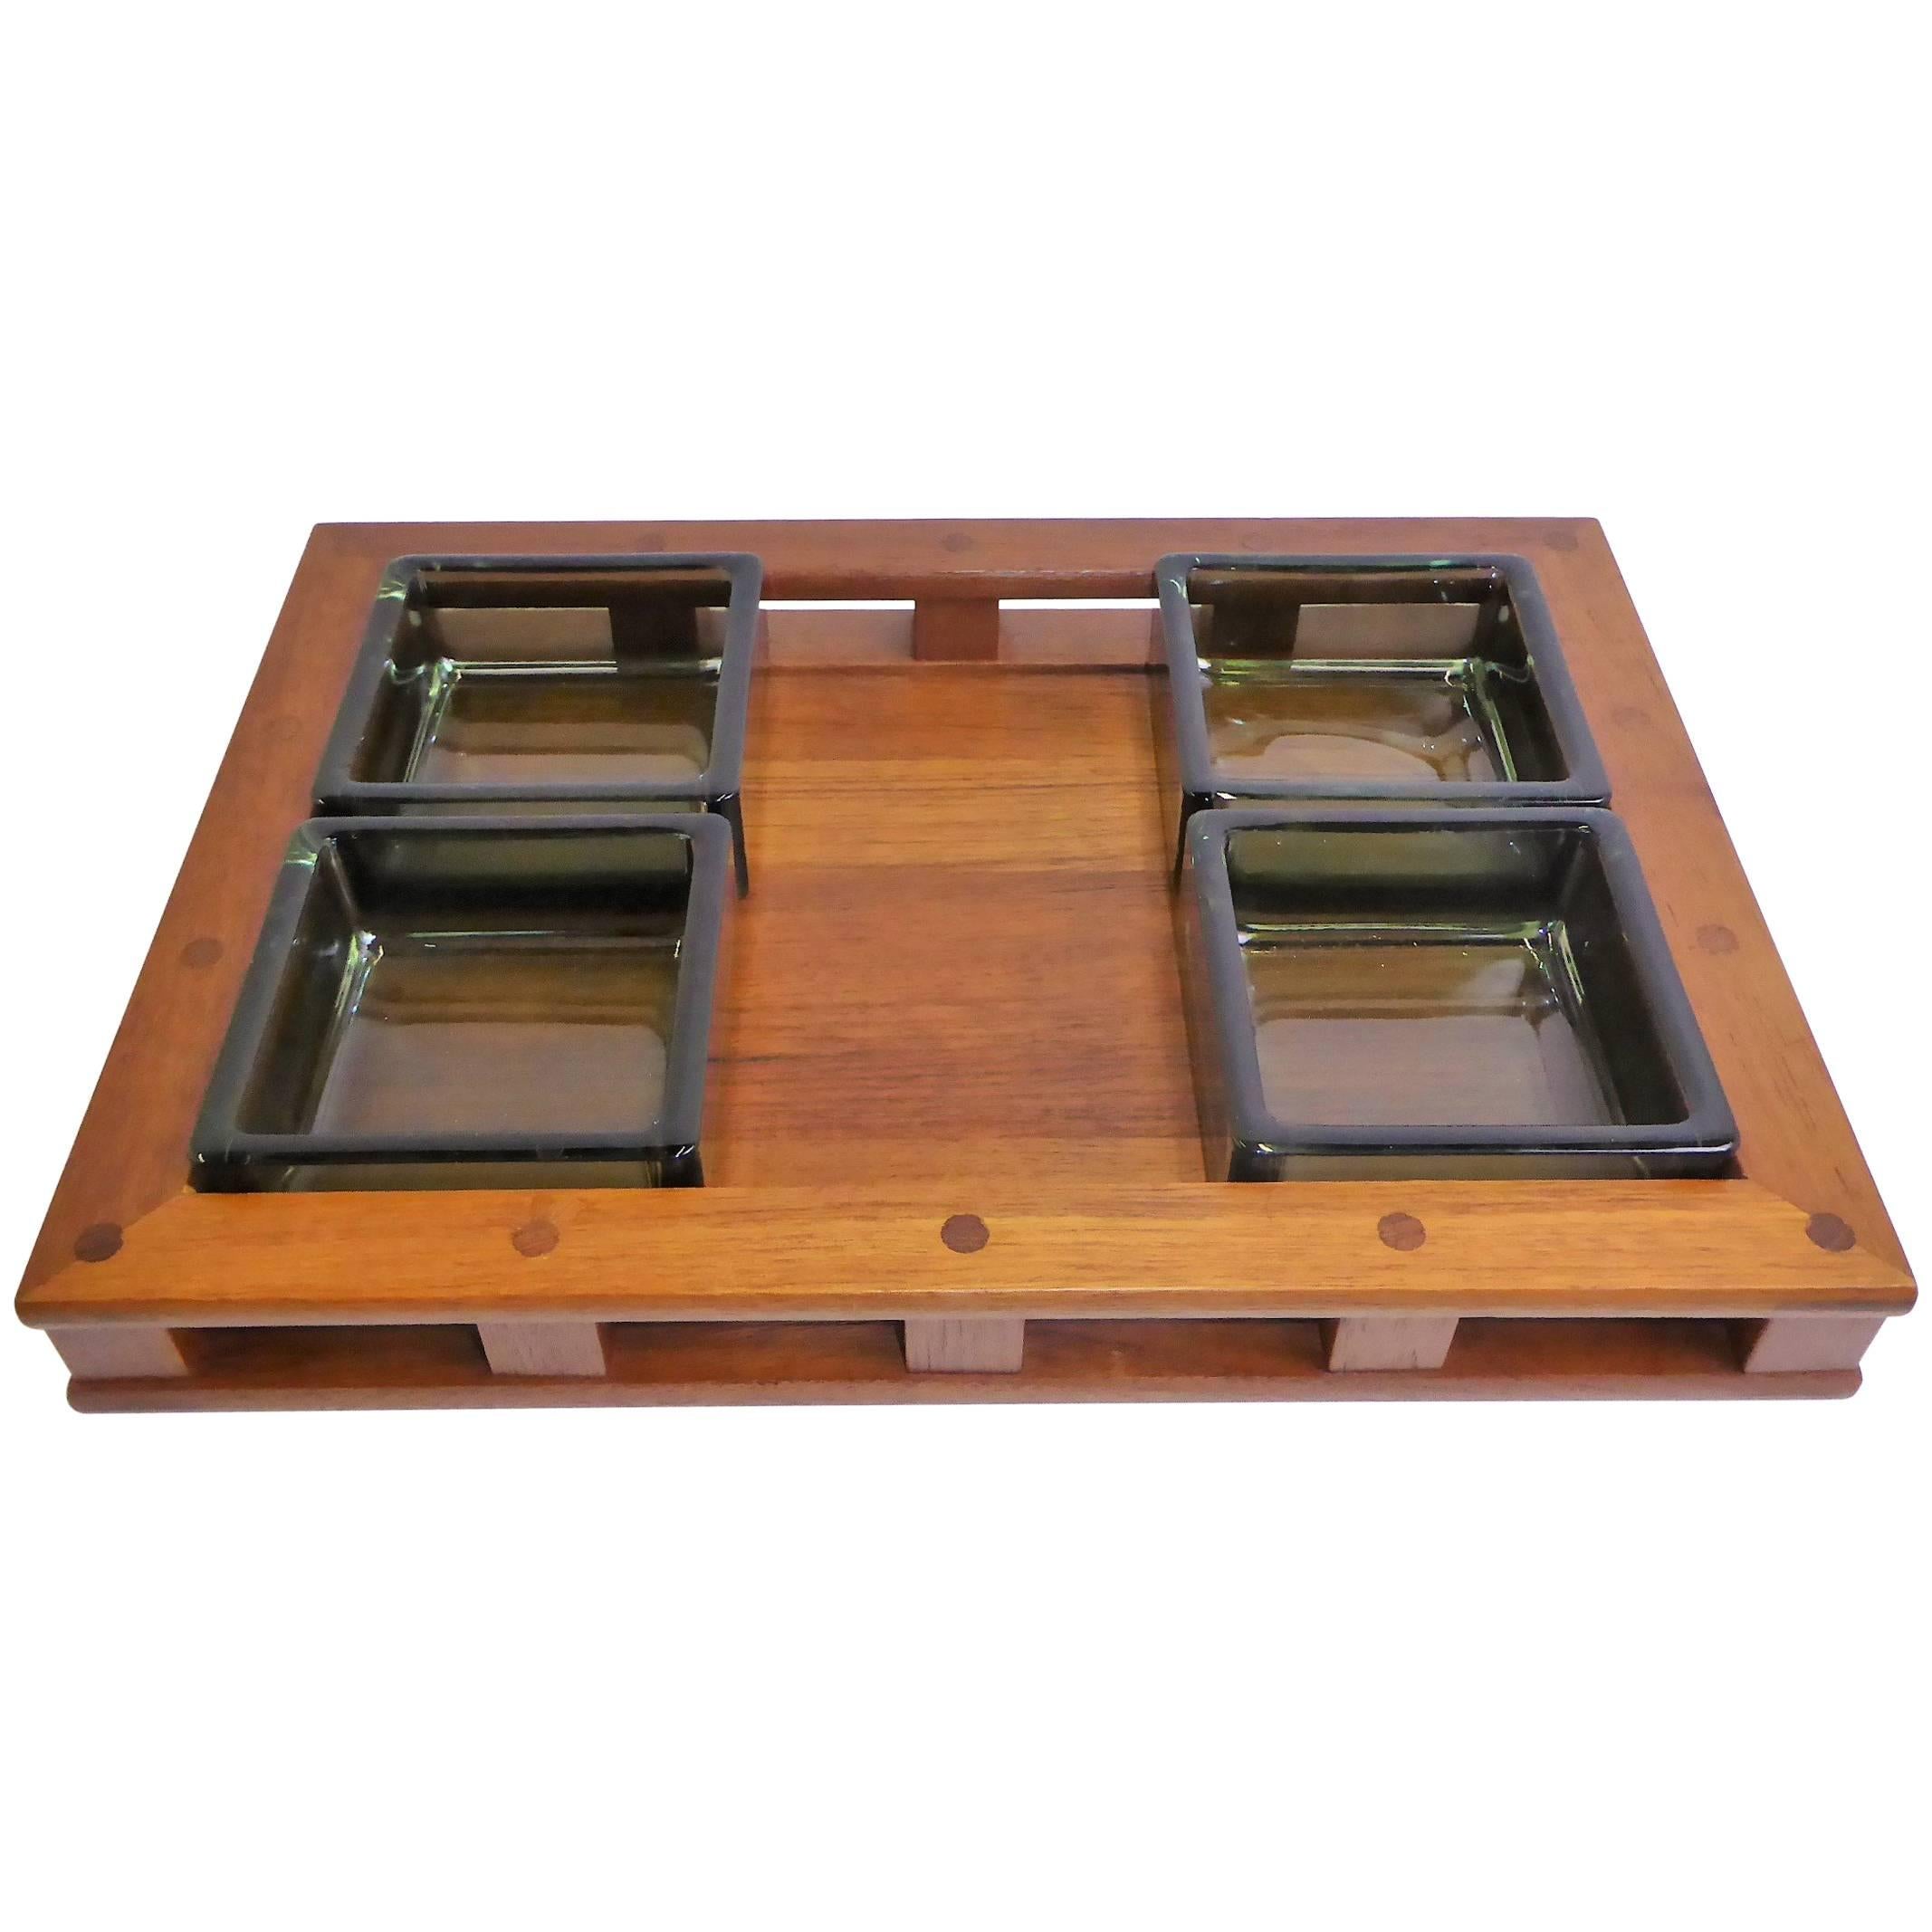 Early Jens Quistgaard Teak Serving Tray with Glass Inserts